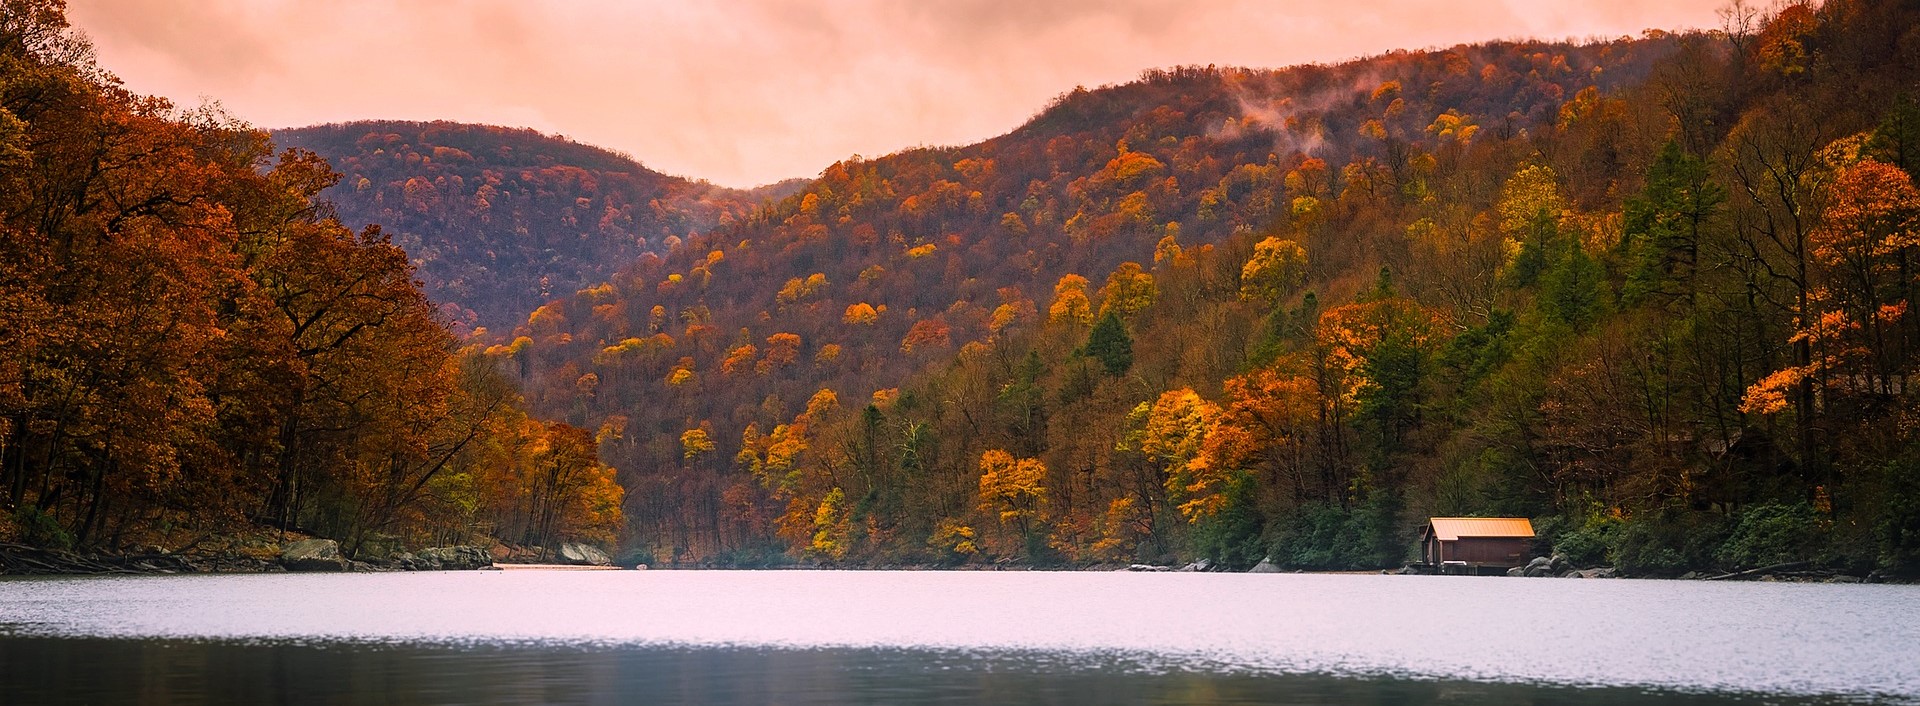 The 13-mile-long reservoir Cheat Lake in West Virginia | Kids Car Donations